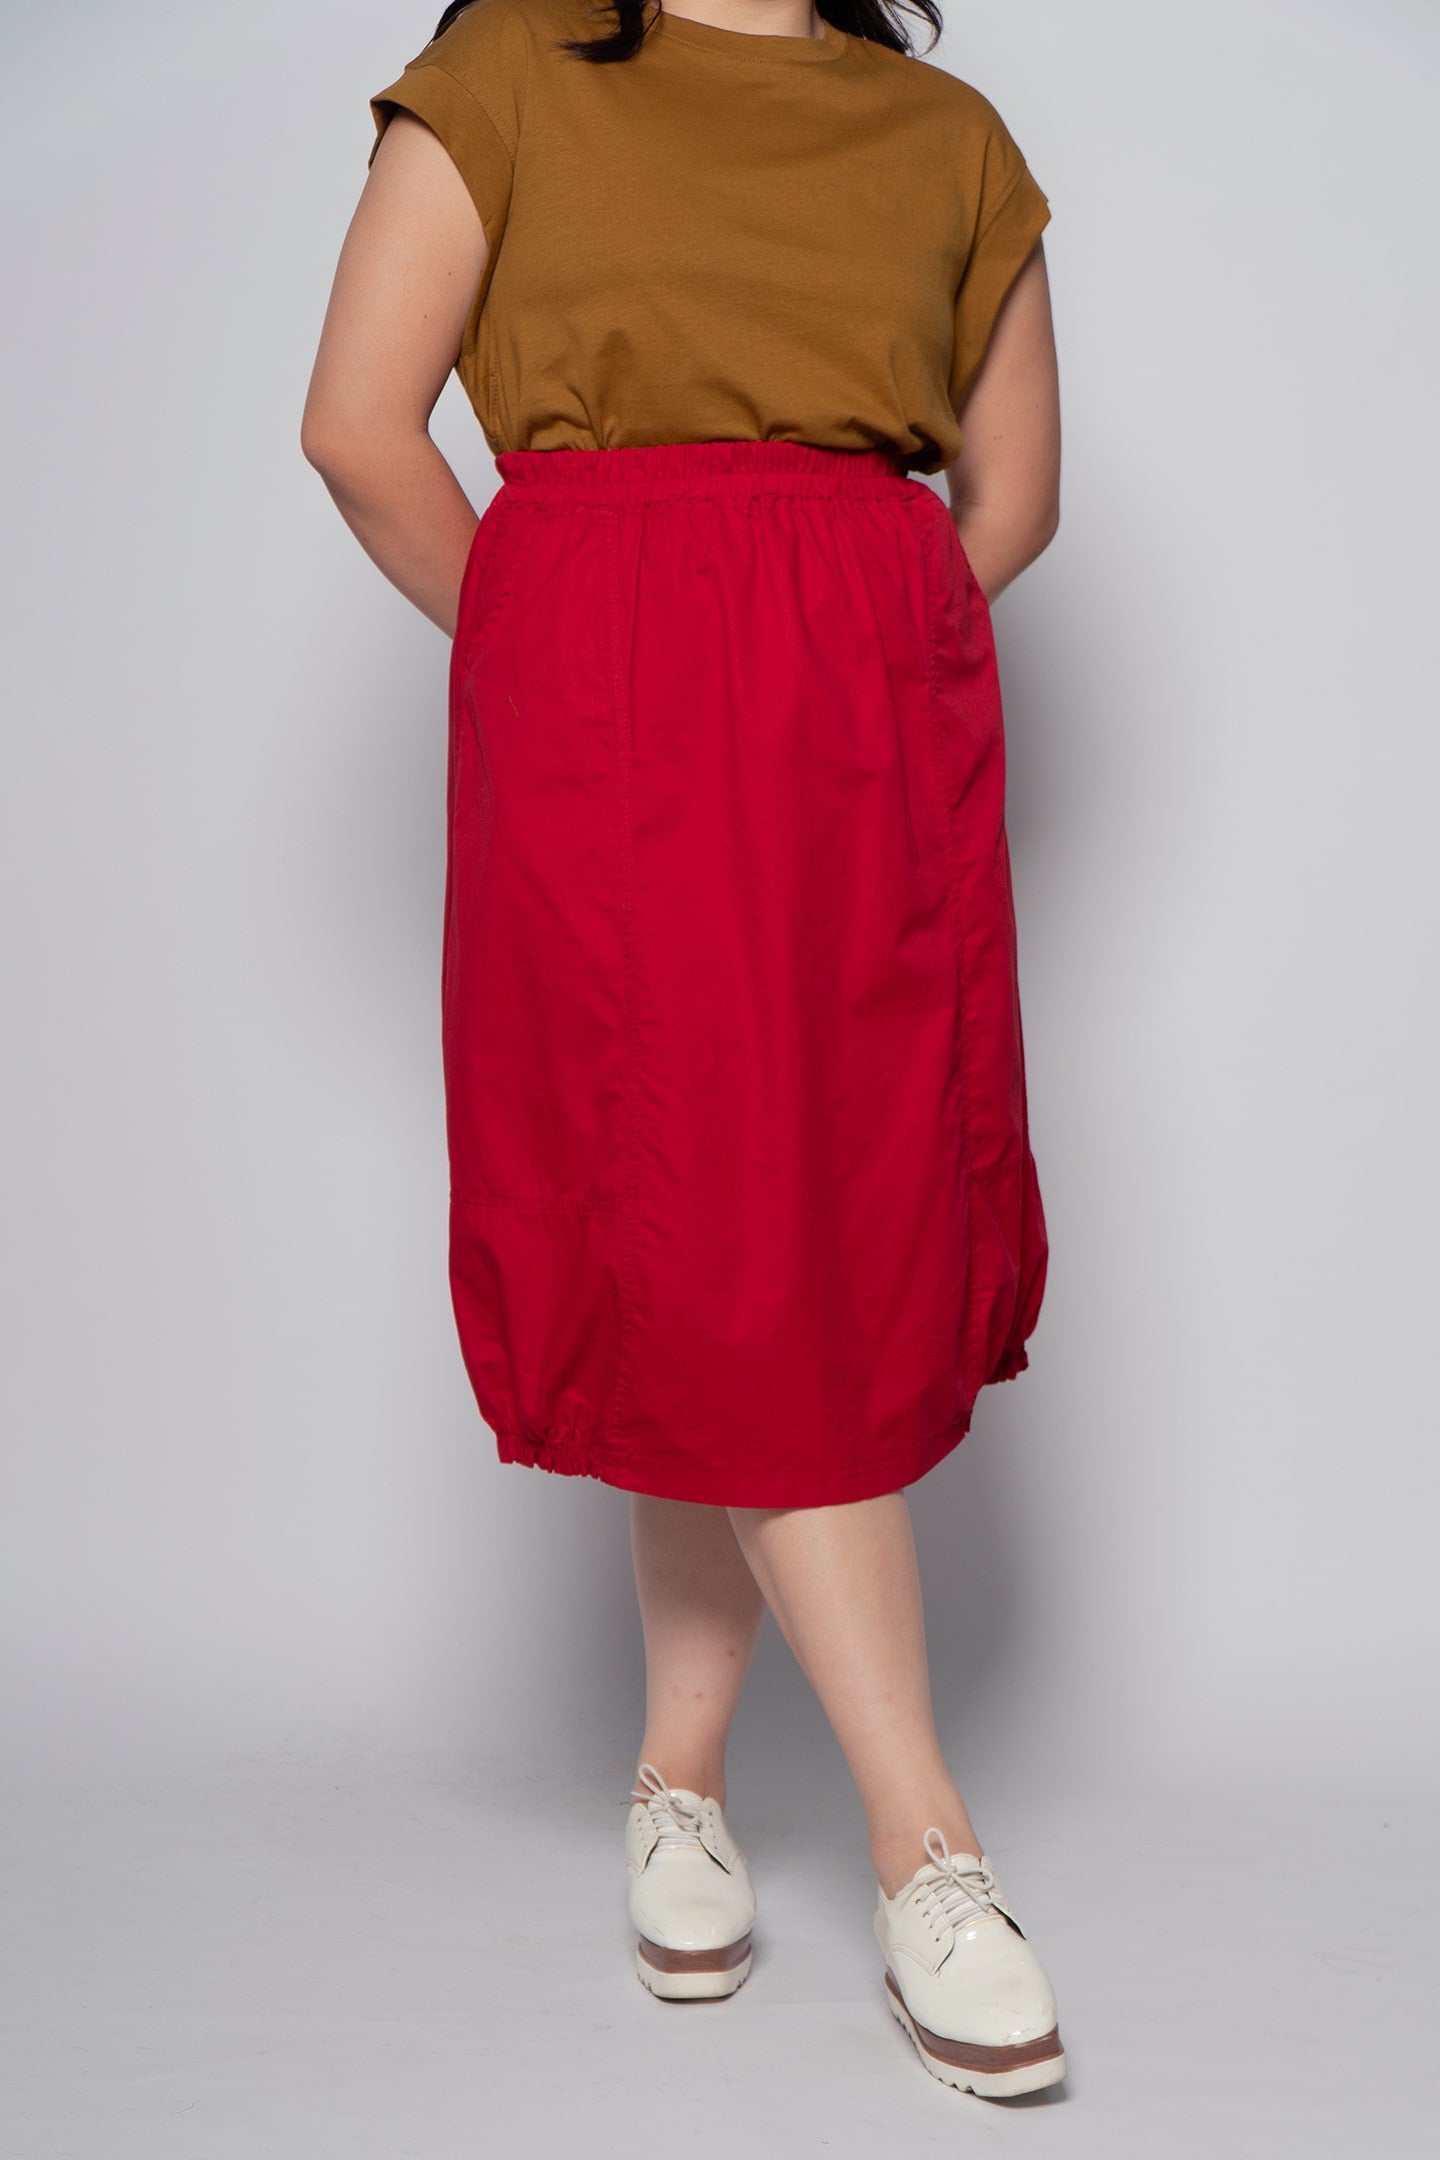 Quinto Skirt in Maroon Red